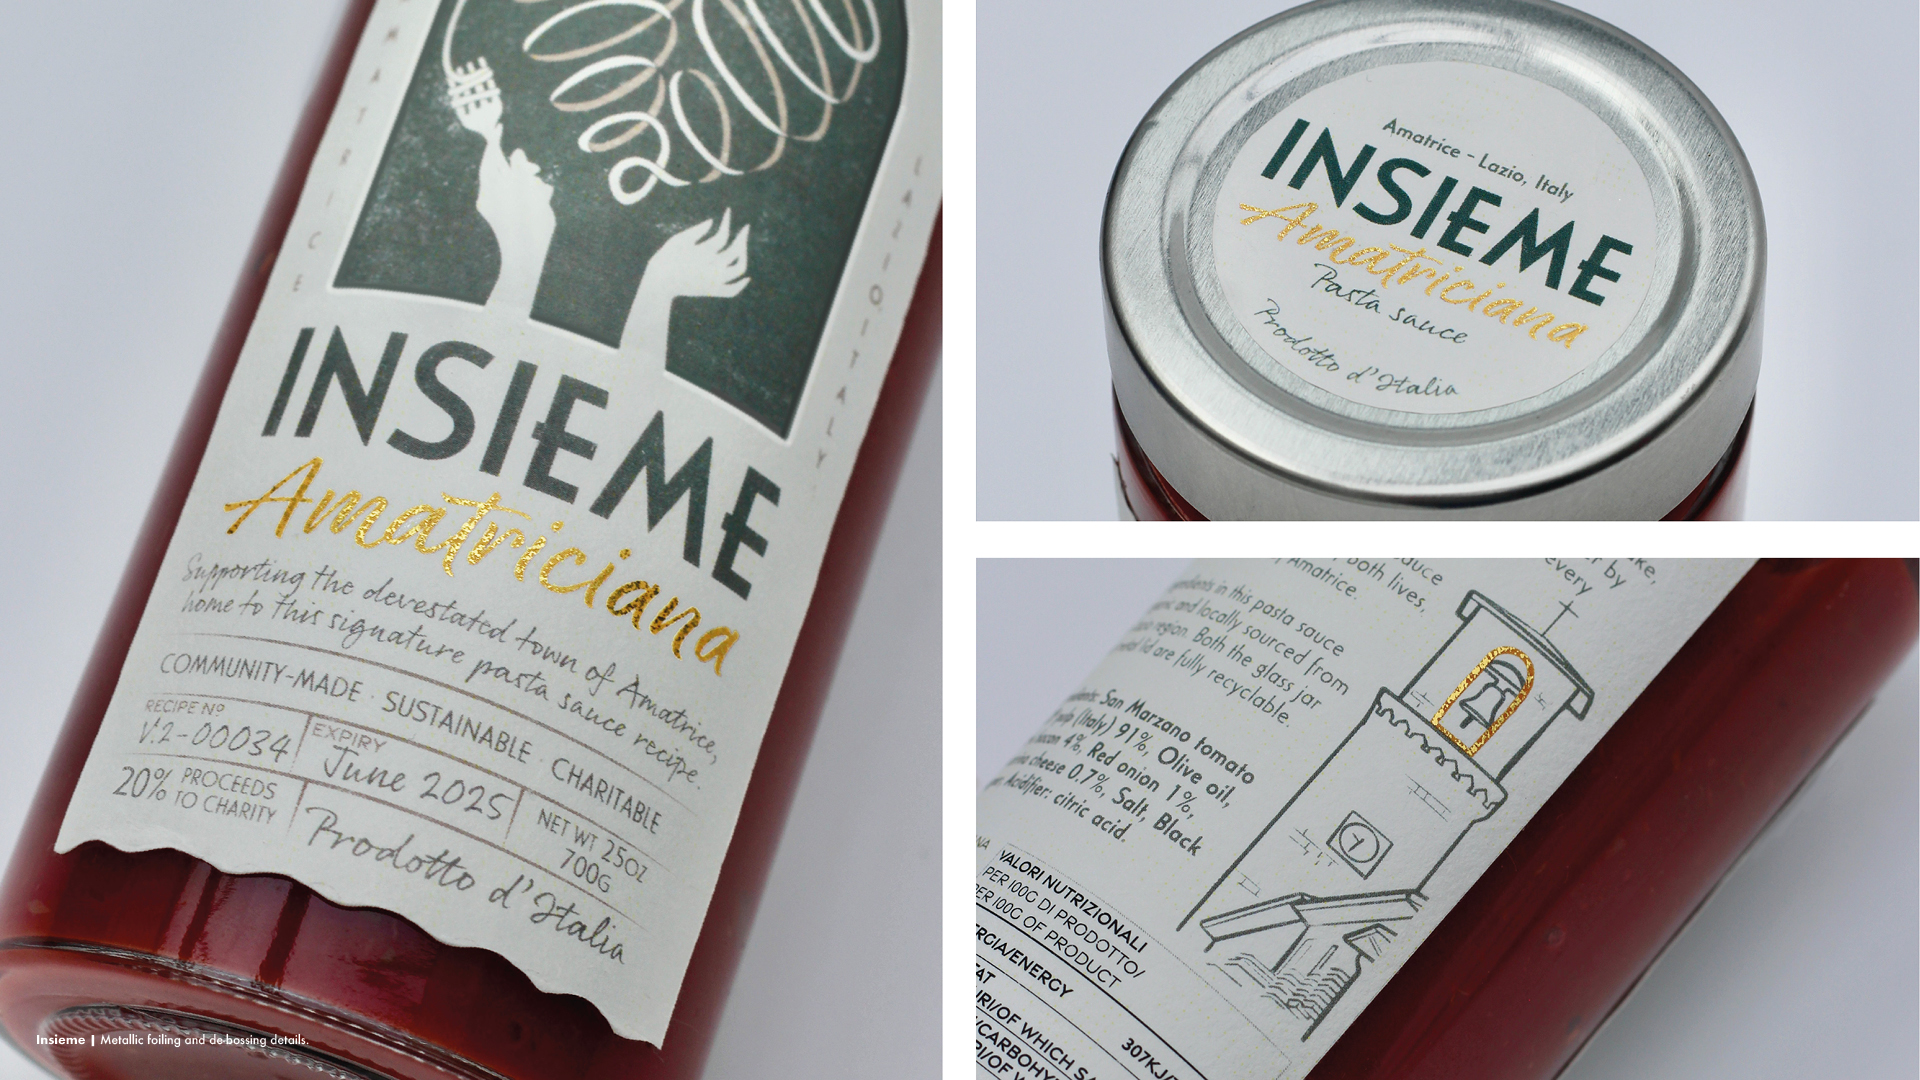 Close up photographs of Insieme package design by Abigail Ballard-Lawrence showing debossing and foiling details